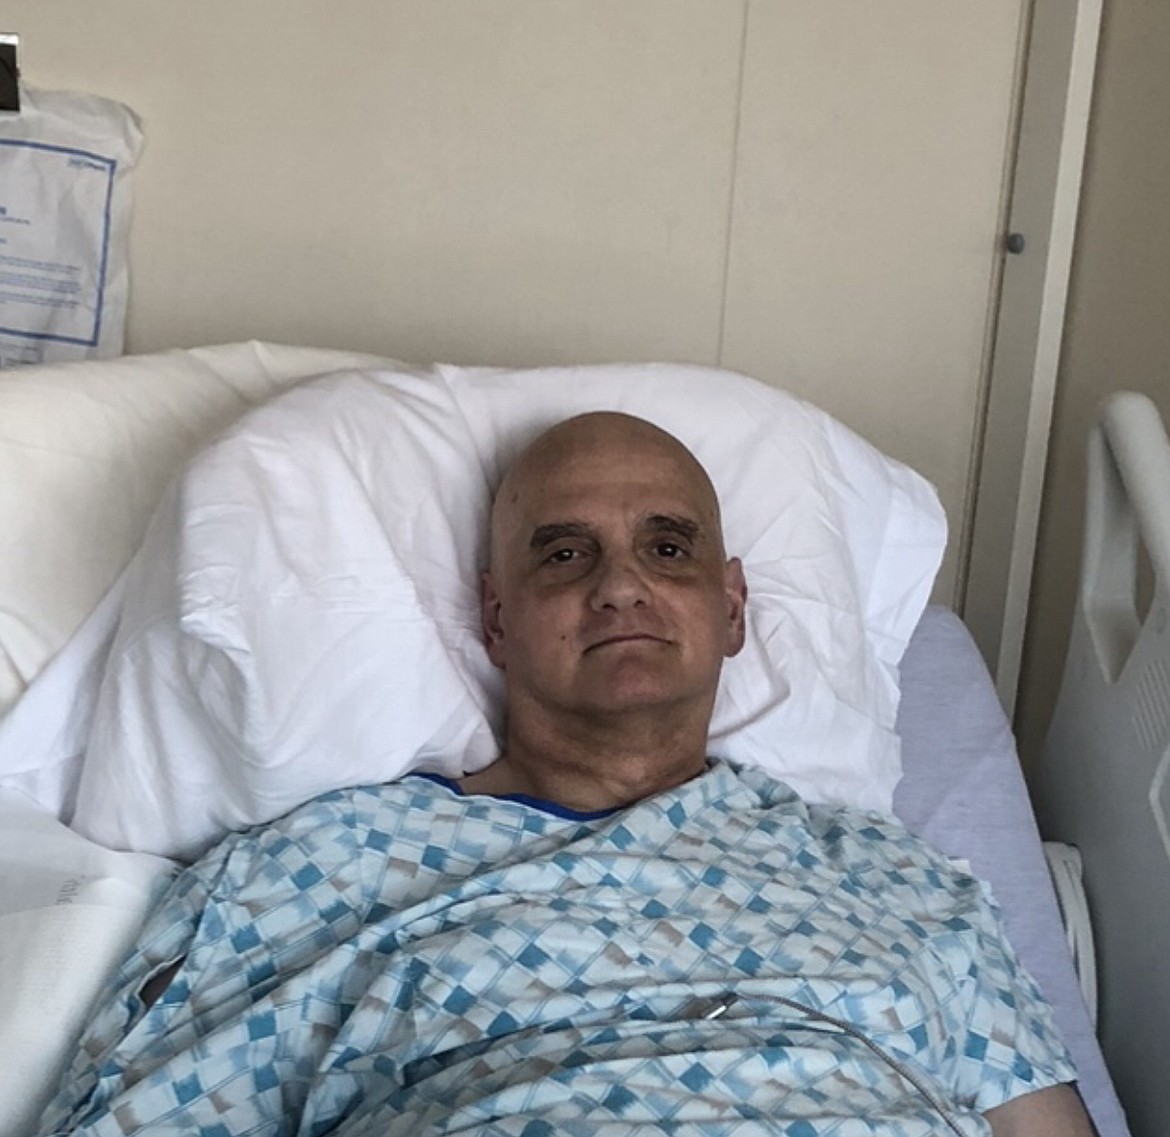 Within a week after Robin Bates arrived home from Mexico, he was dropped on the floor by staff at a rehabilitiation facility. In mid June he was transferred to Kootenai Health, pictured. He also caught COVID-19 and food poisoning and spent months in the hospital.